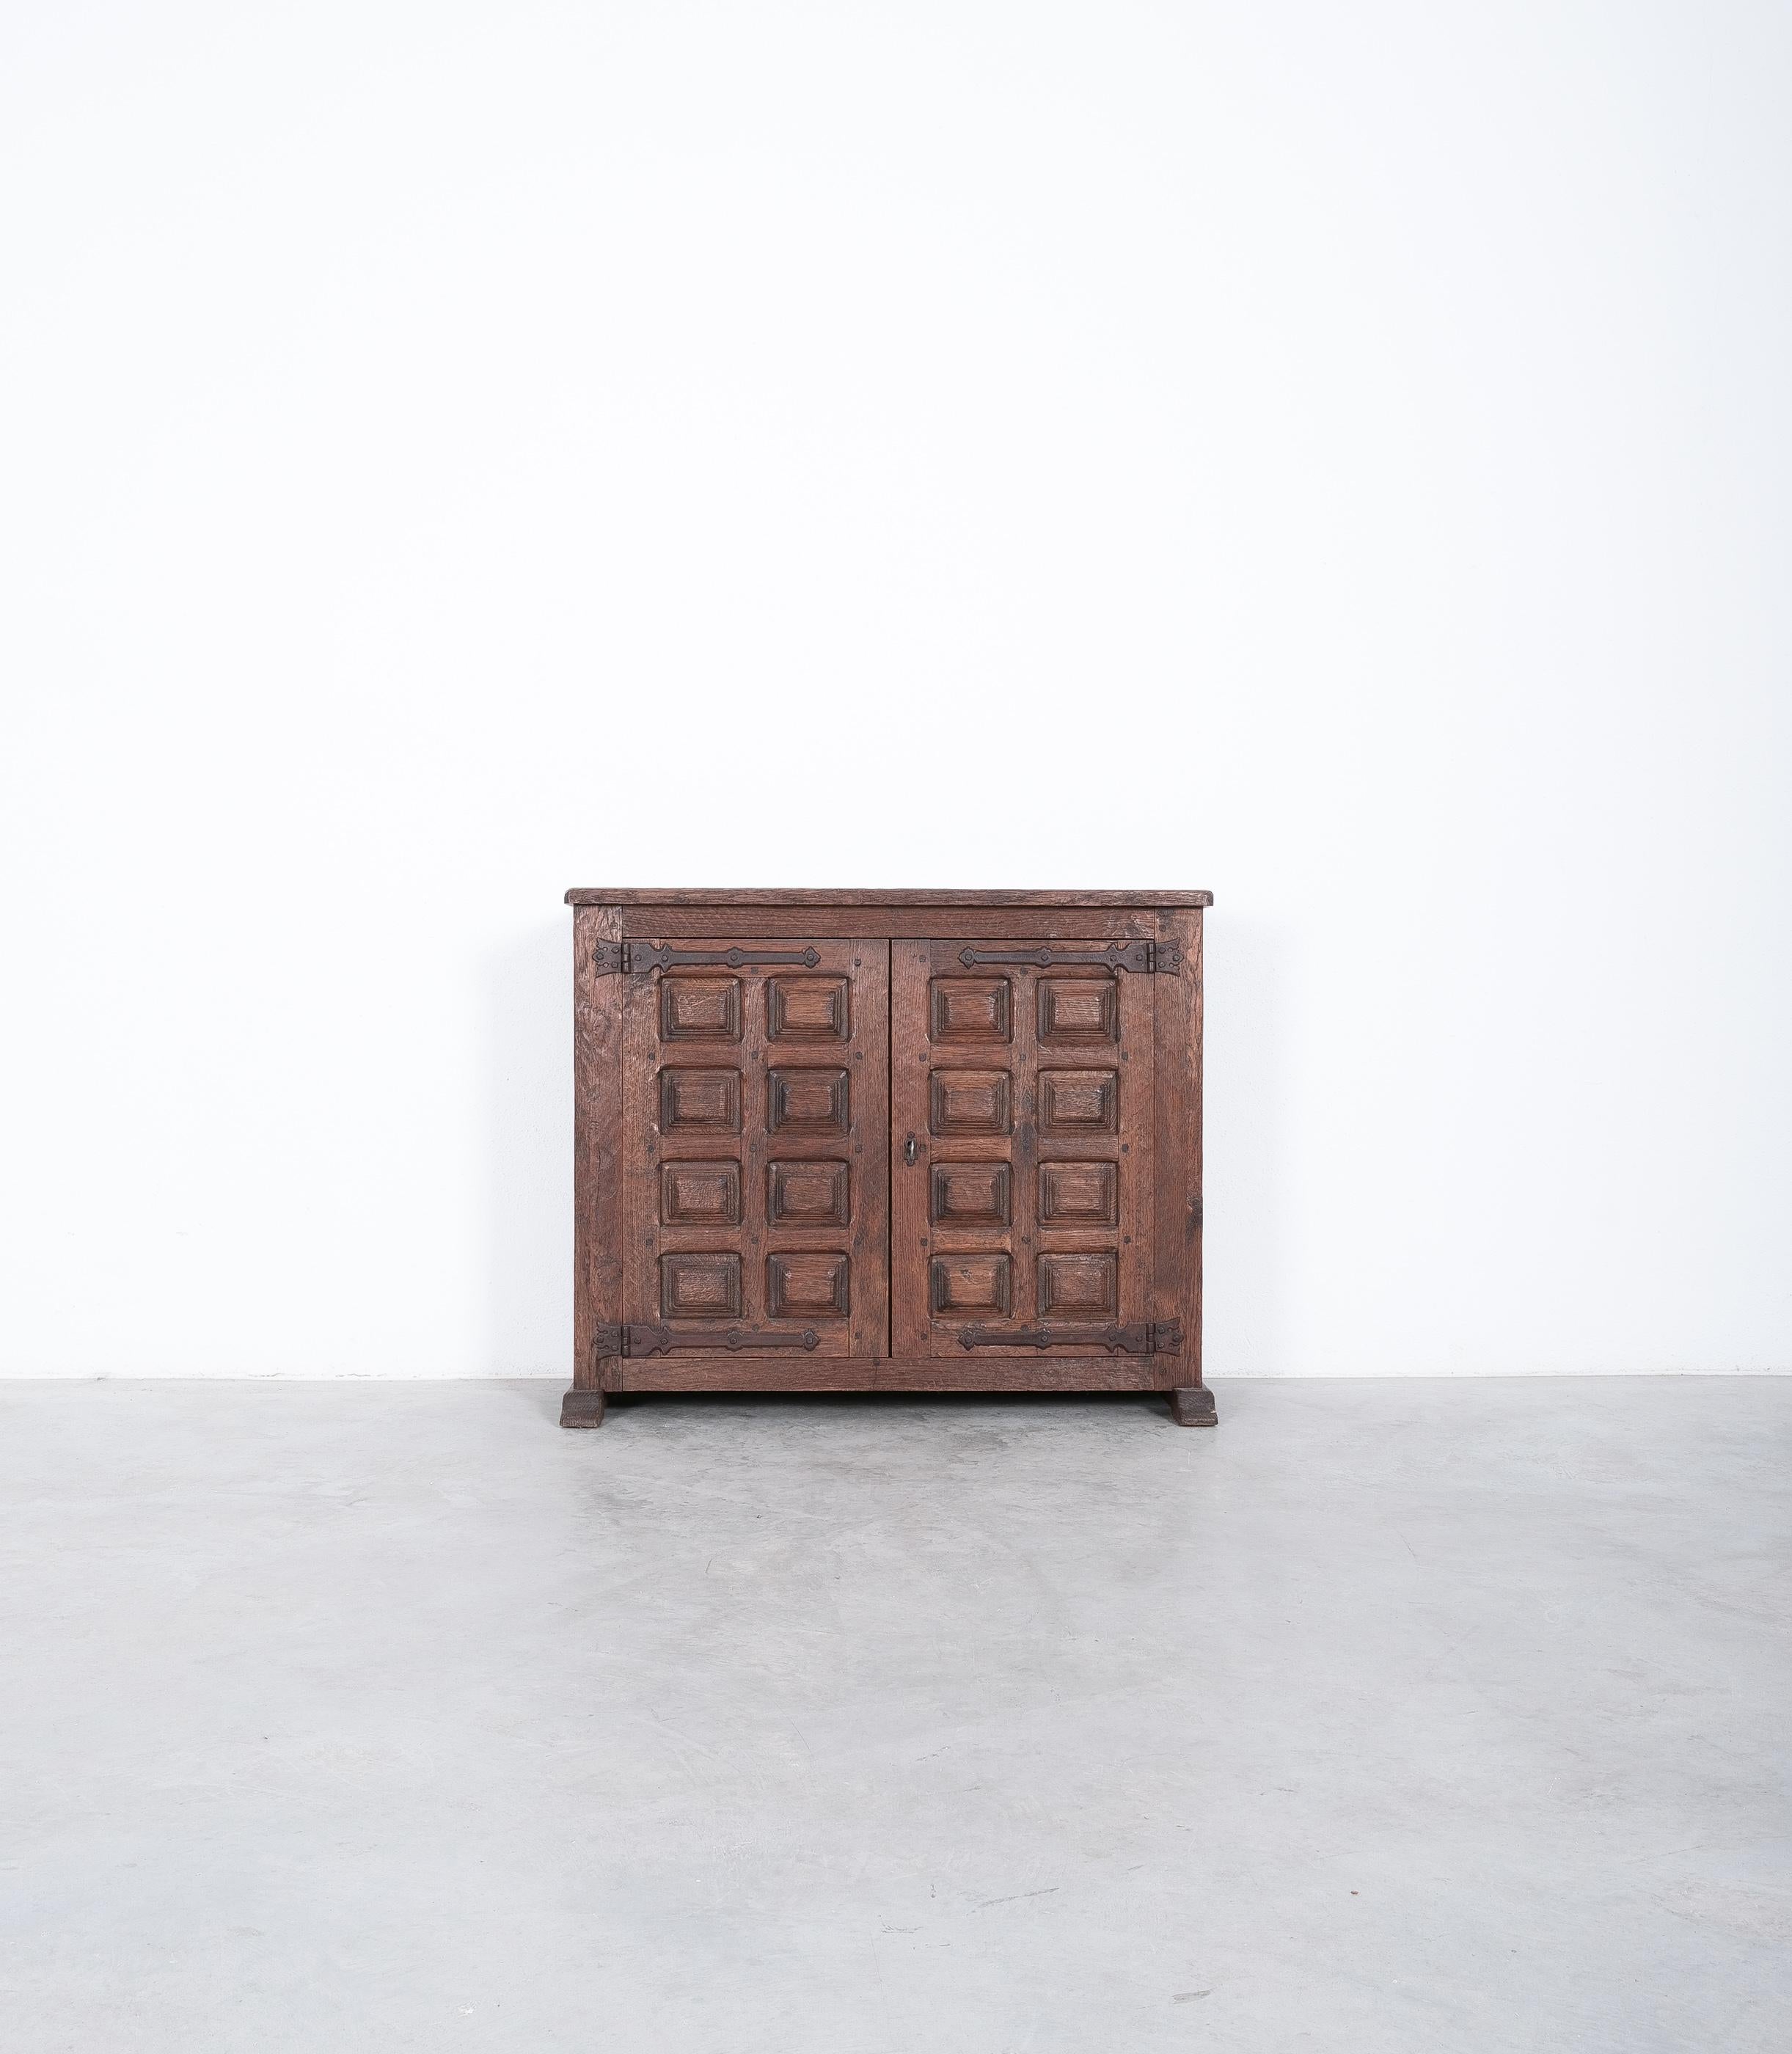 Brutalist french sideboard from carved oak, circa 1940-1950

Perfectly sized 39